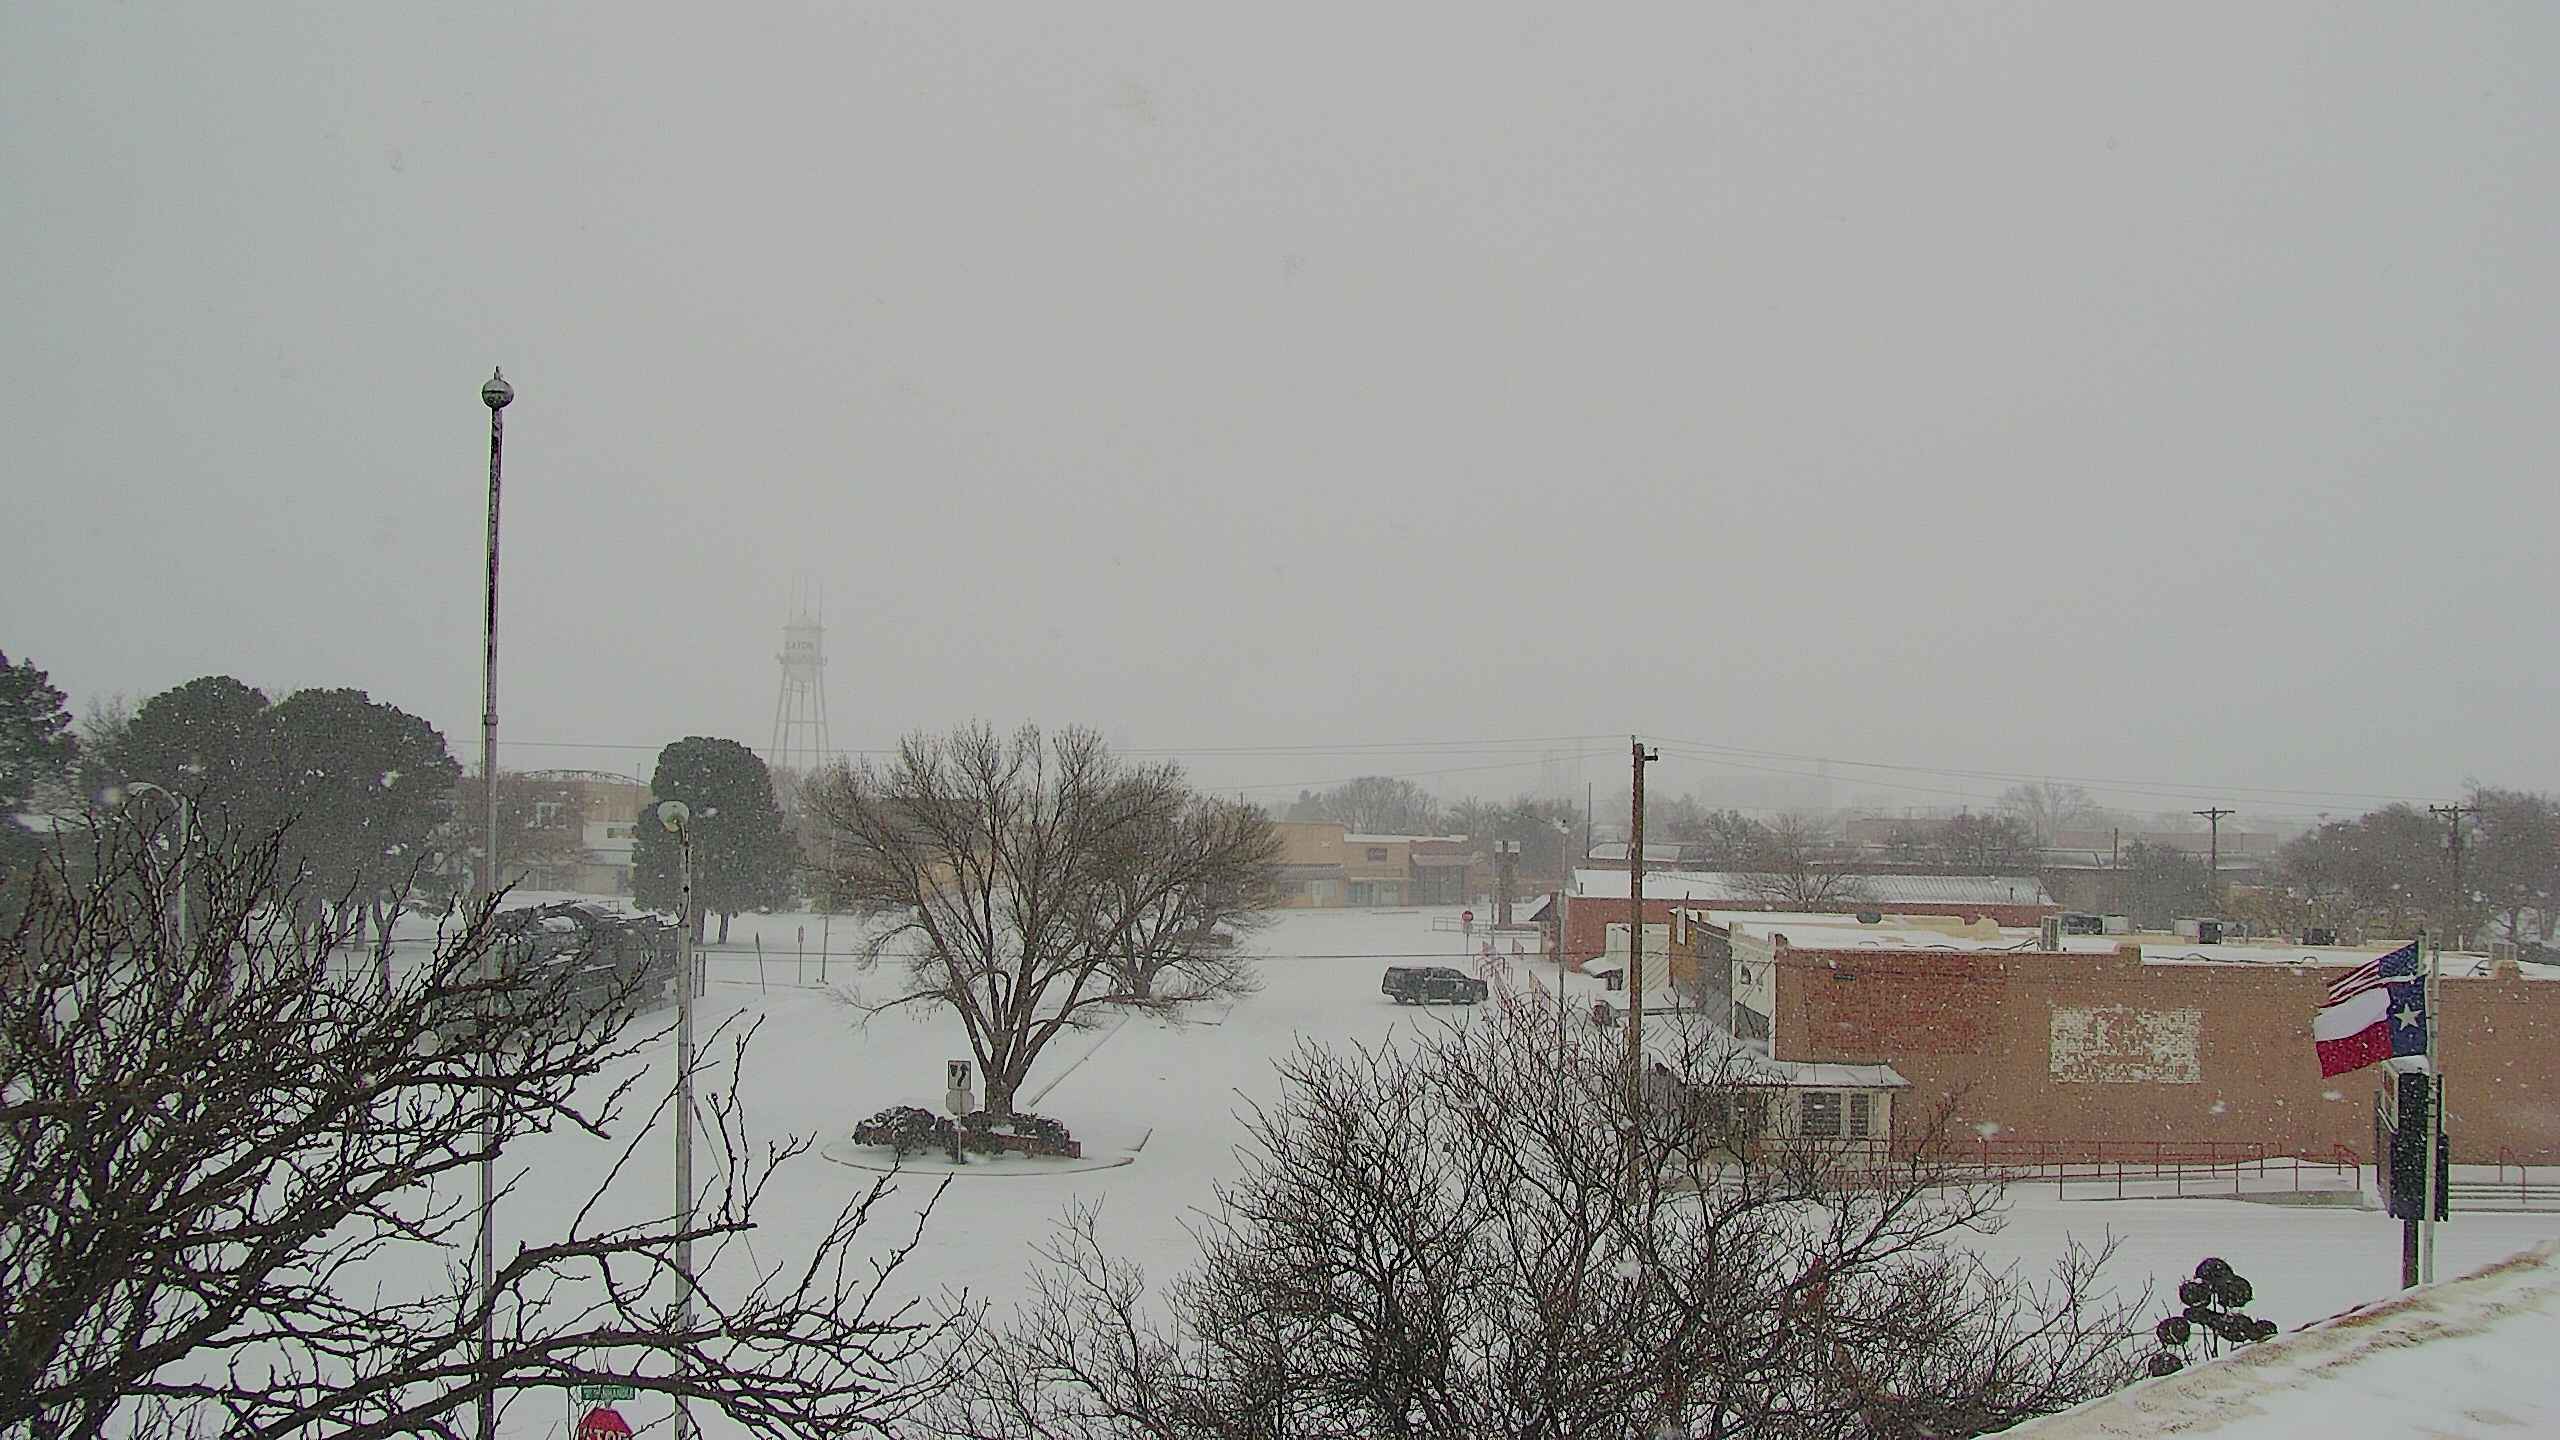 Snow falling in Slaton early Tuesday afternoon (16 February 2021). The image is courtesy of KAMC.